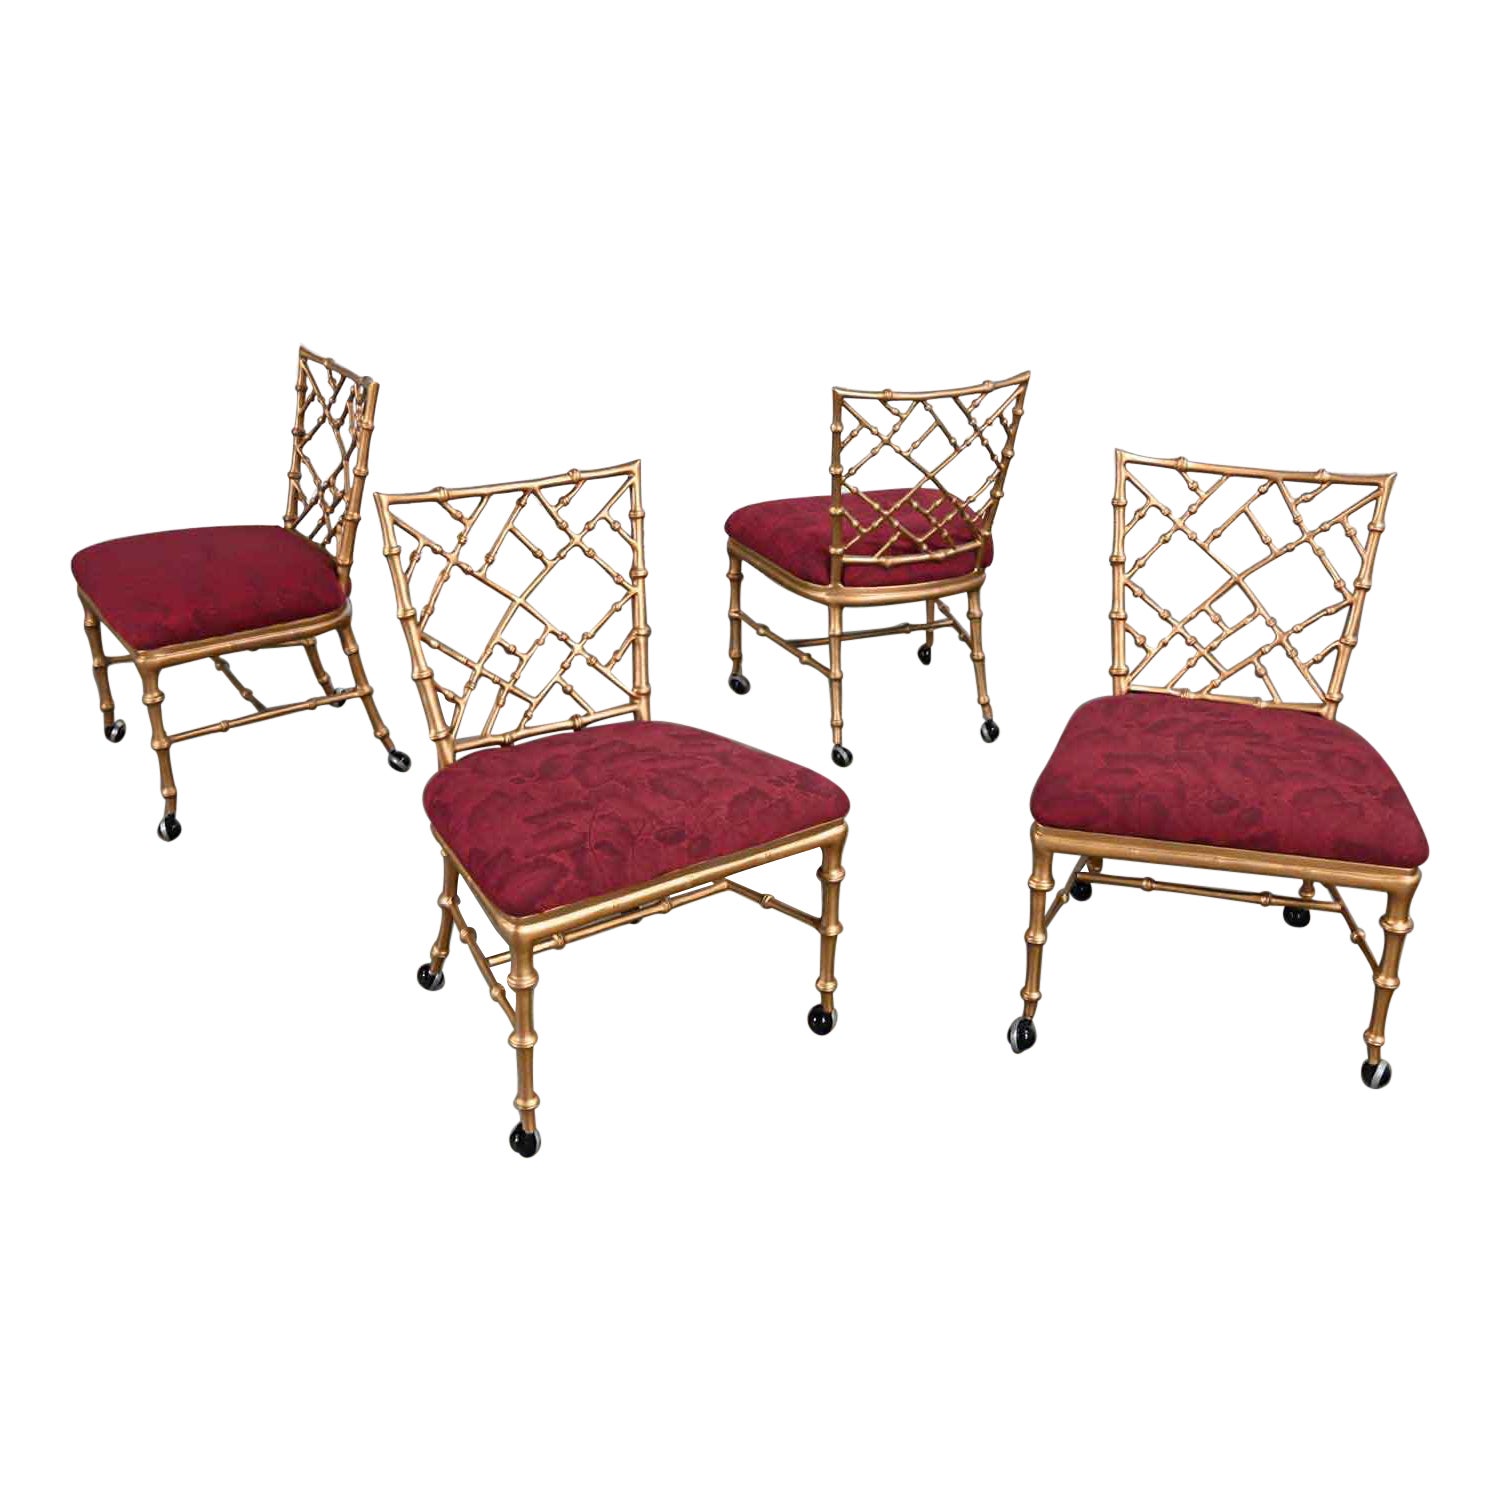 Chinoiserie Faux Bamboo Gold Painted Metal Chairs Rolling Style Phyllis Morris